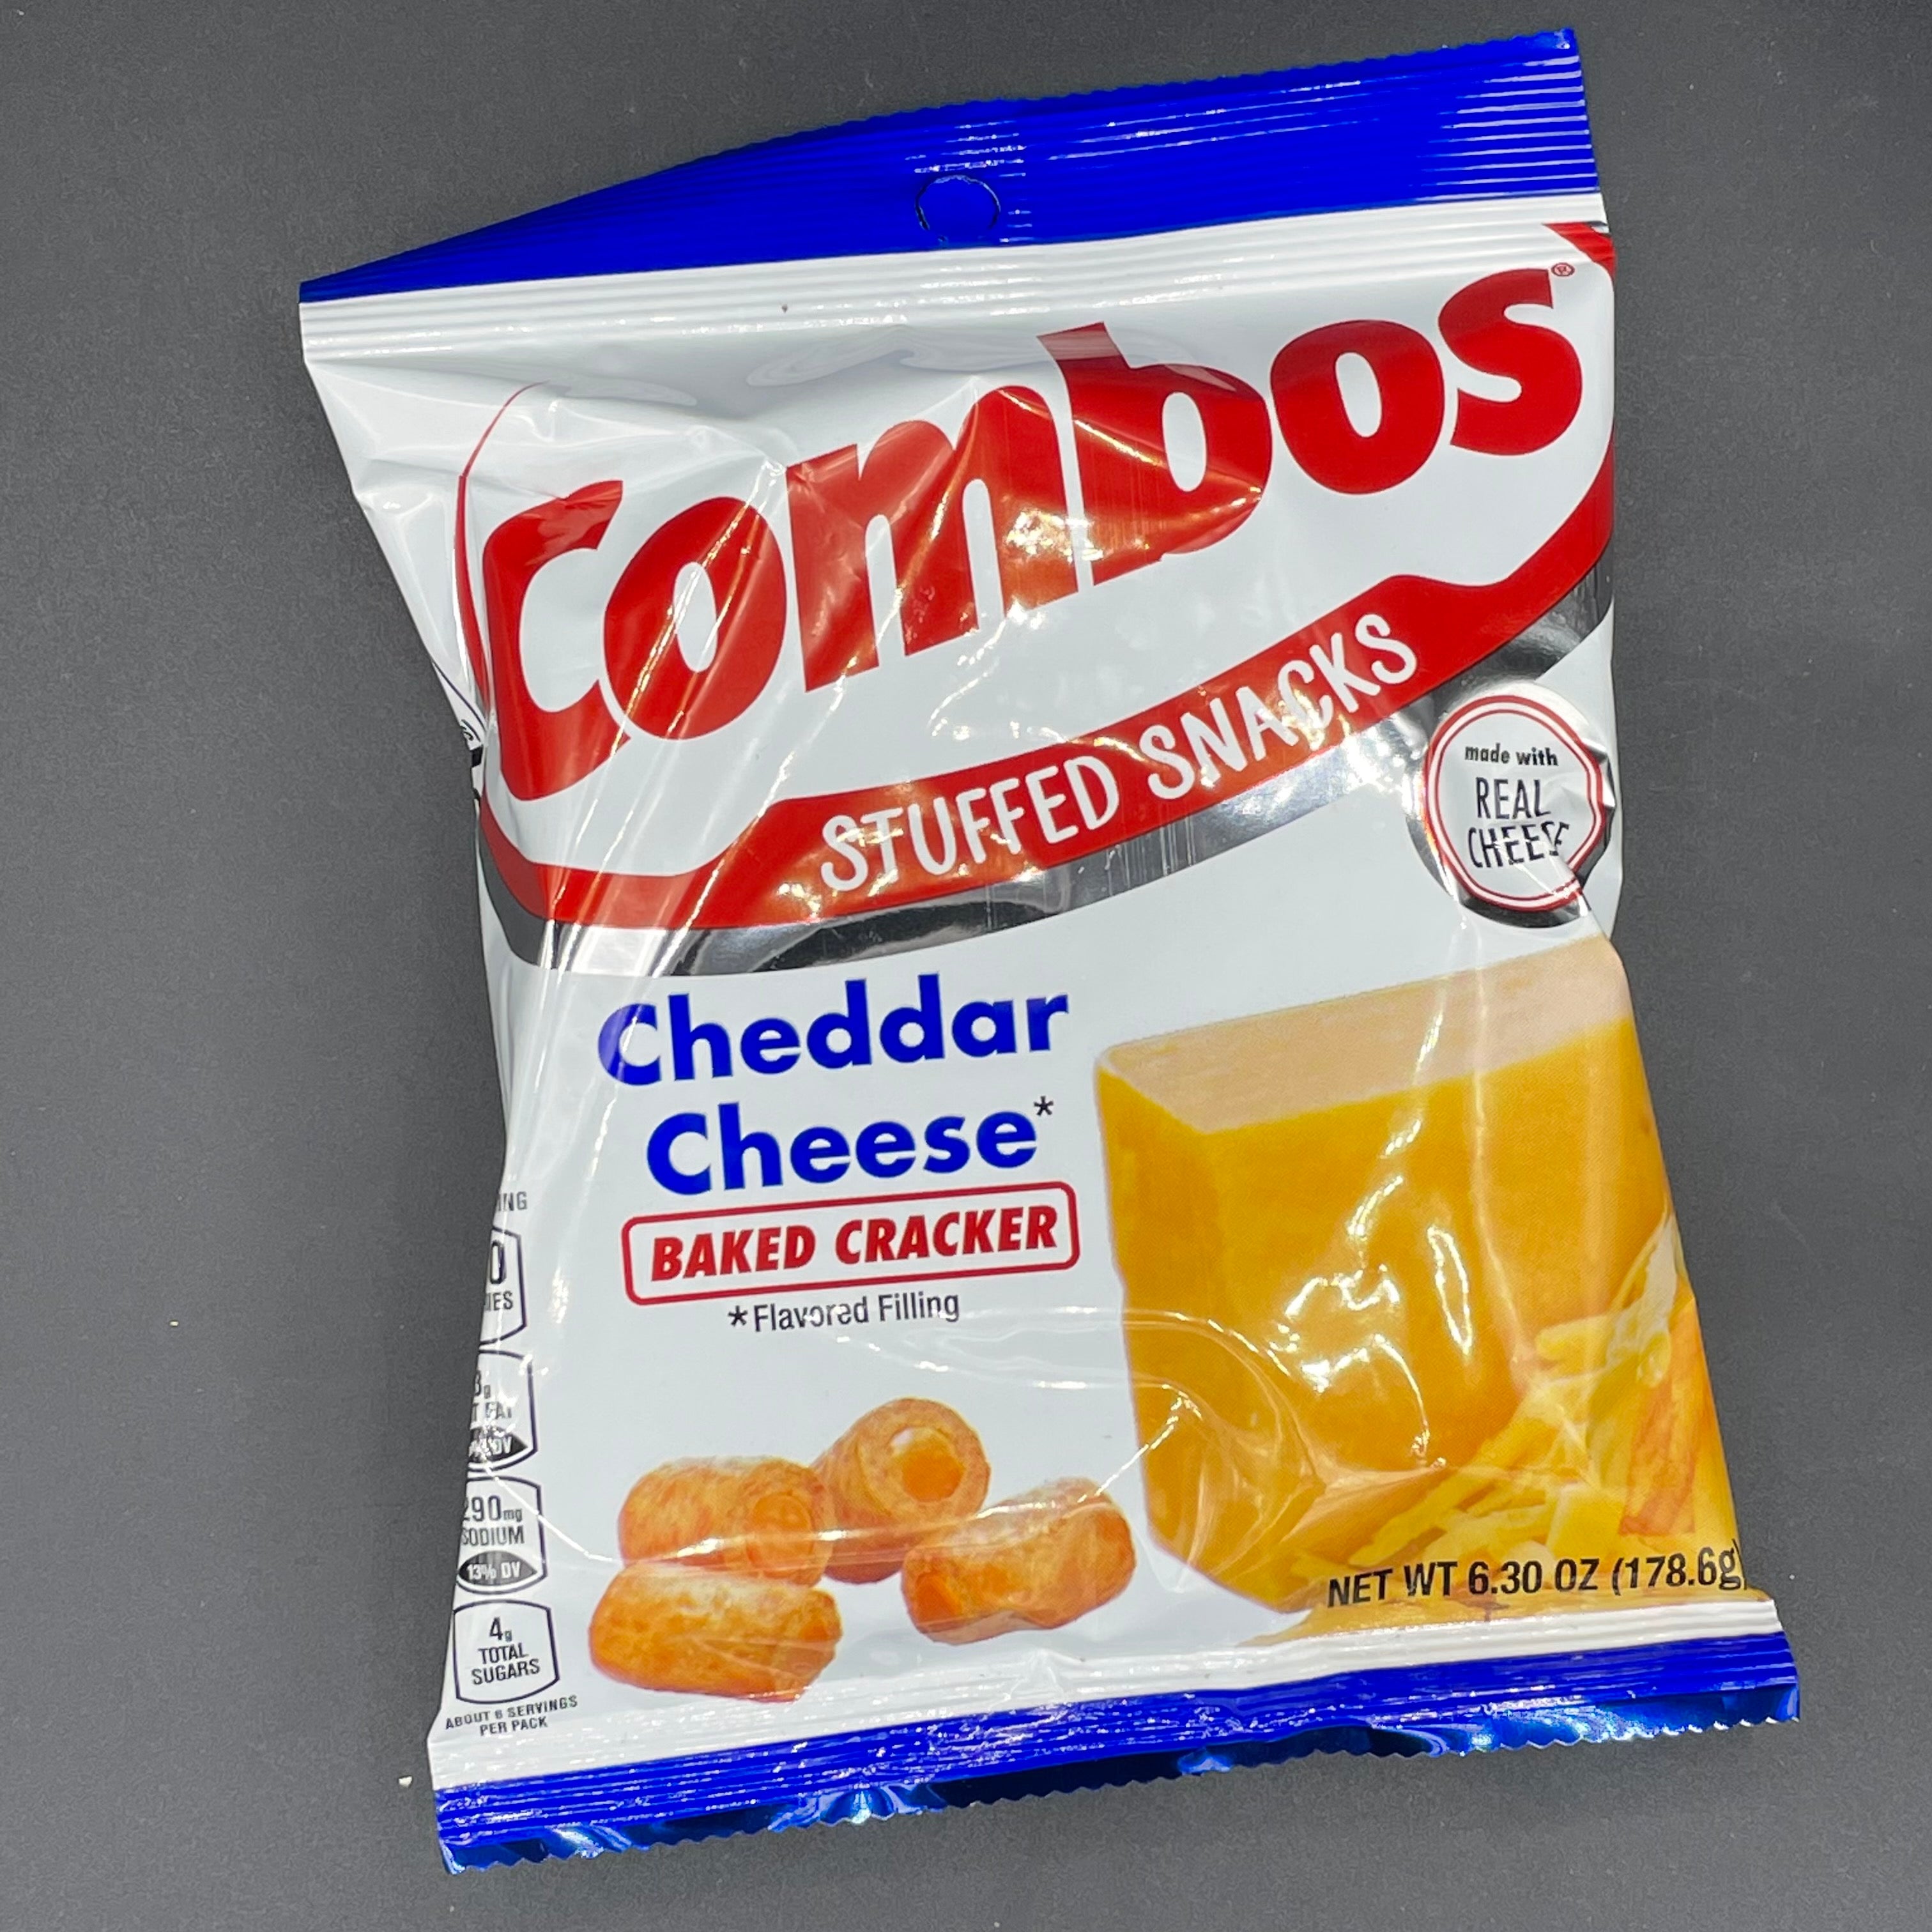 NEW Combos Stuffed Snacks - Cheddar Cheese, Baked Cracker 178g (USA) N